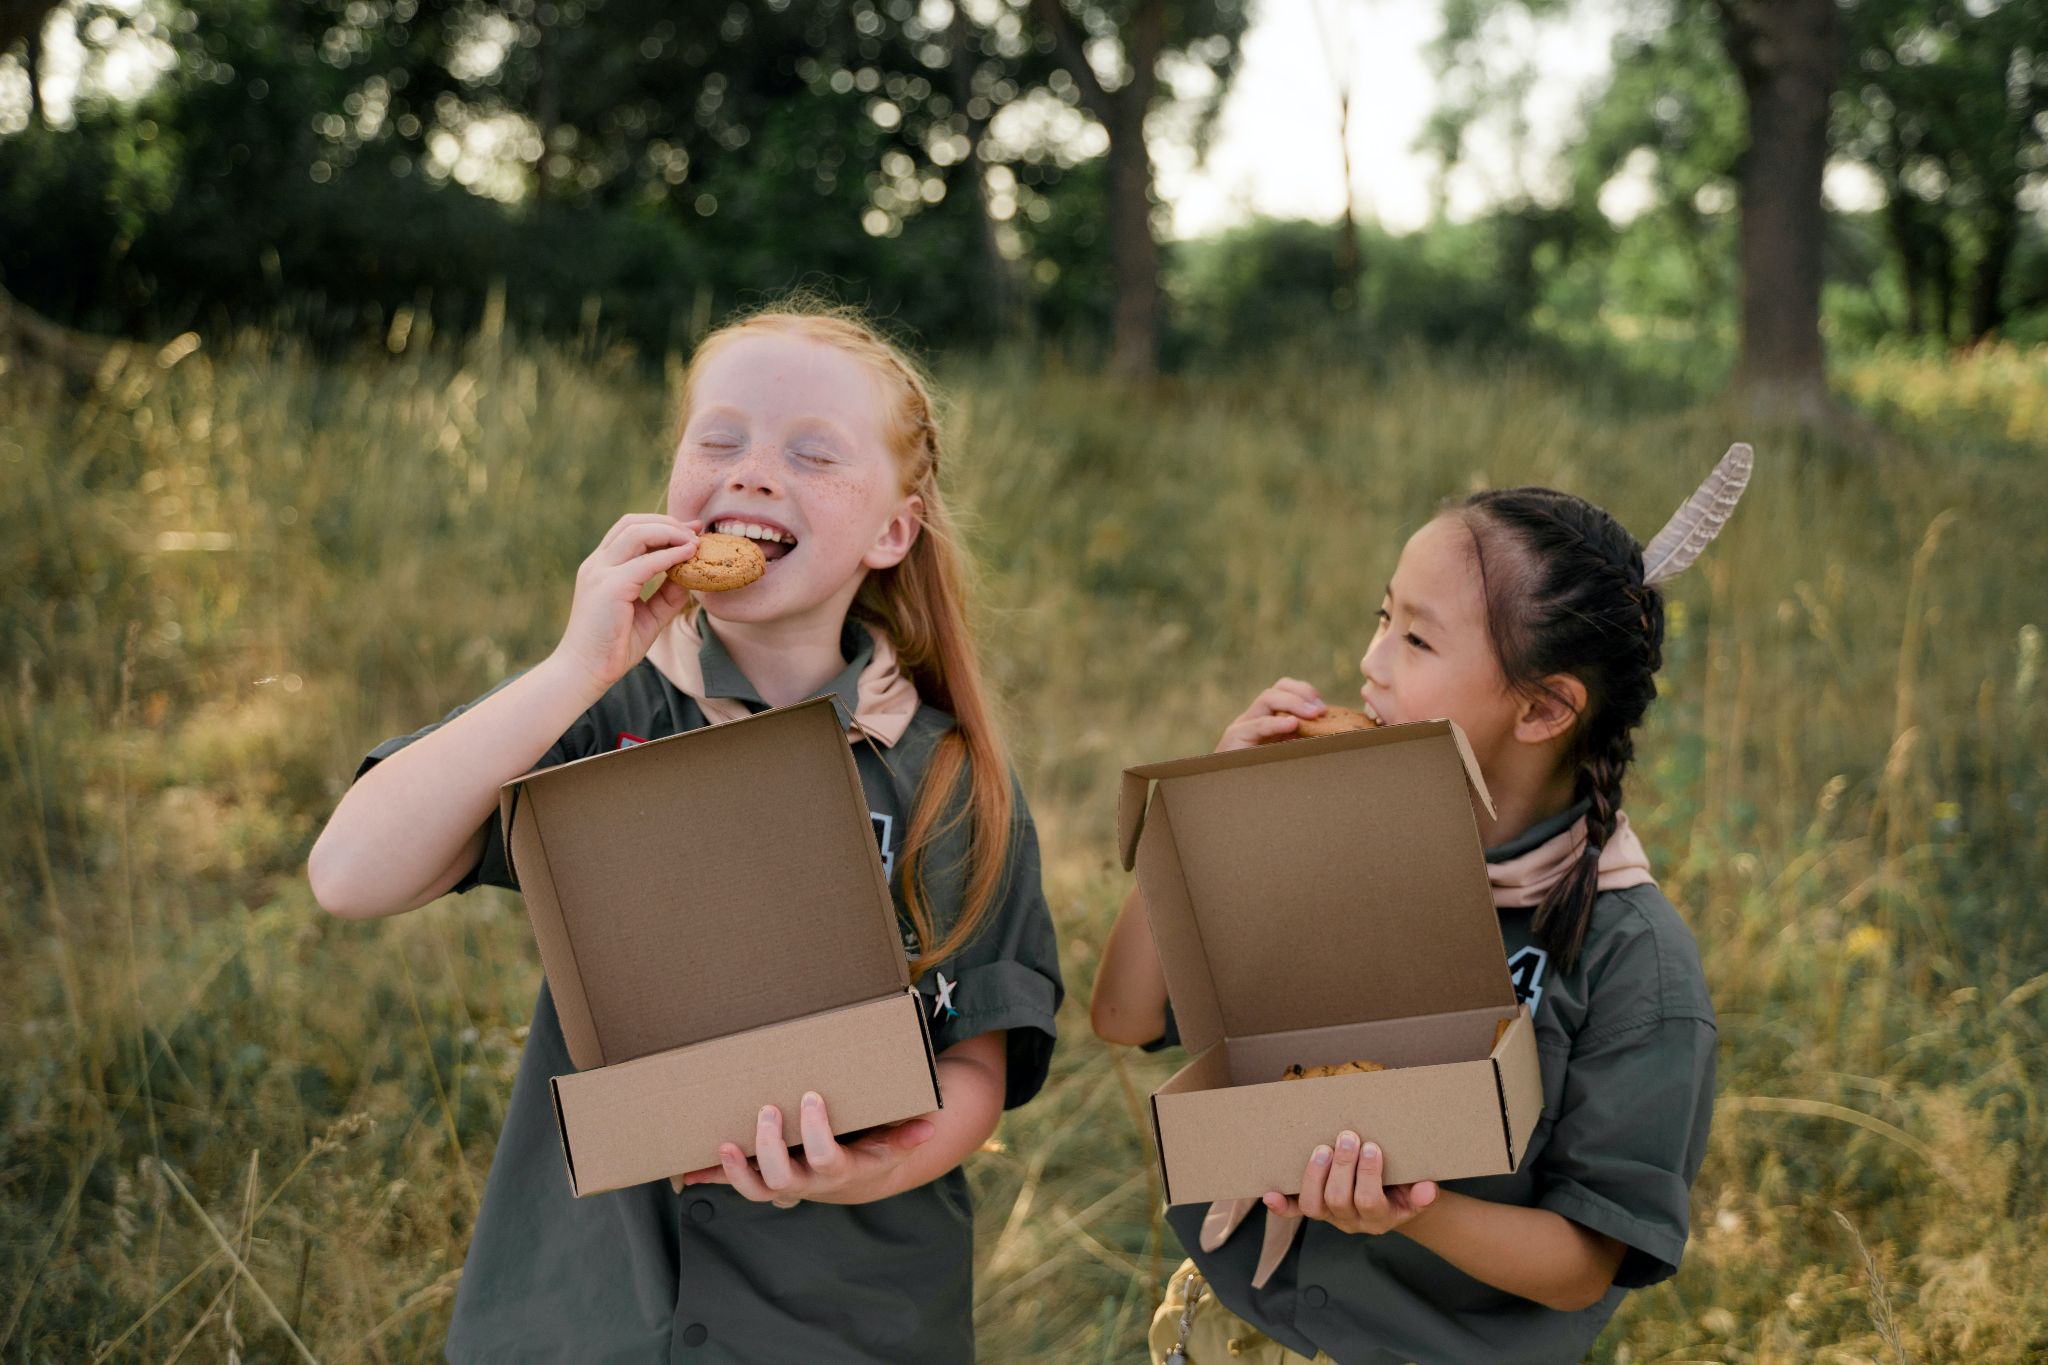 Two girls in scout uniforms eating cookies from boxes each are holding.